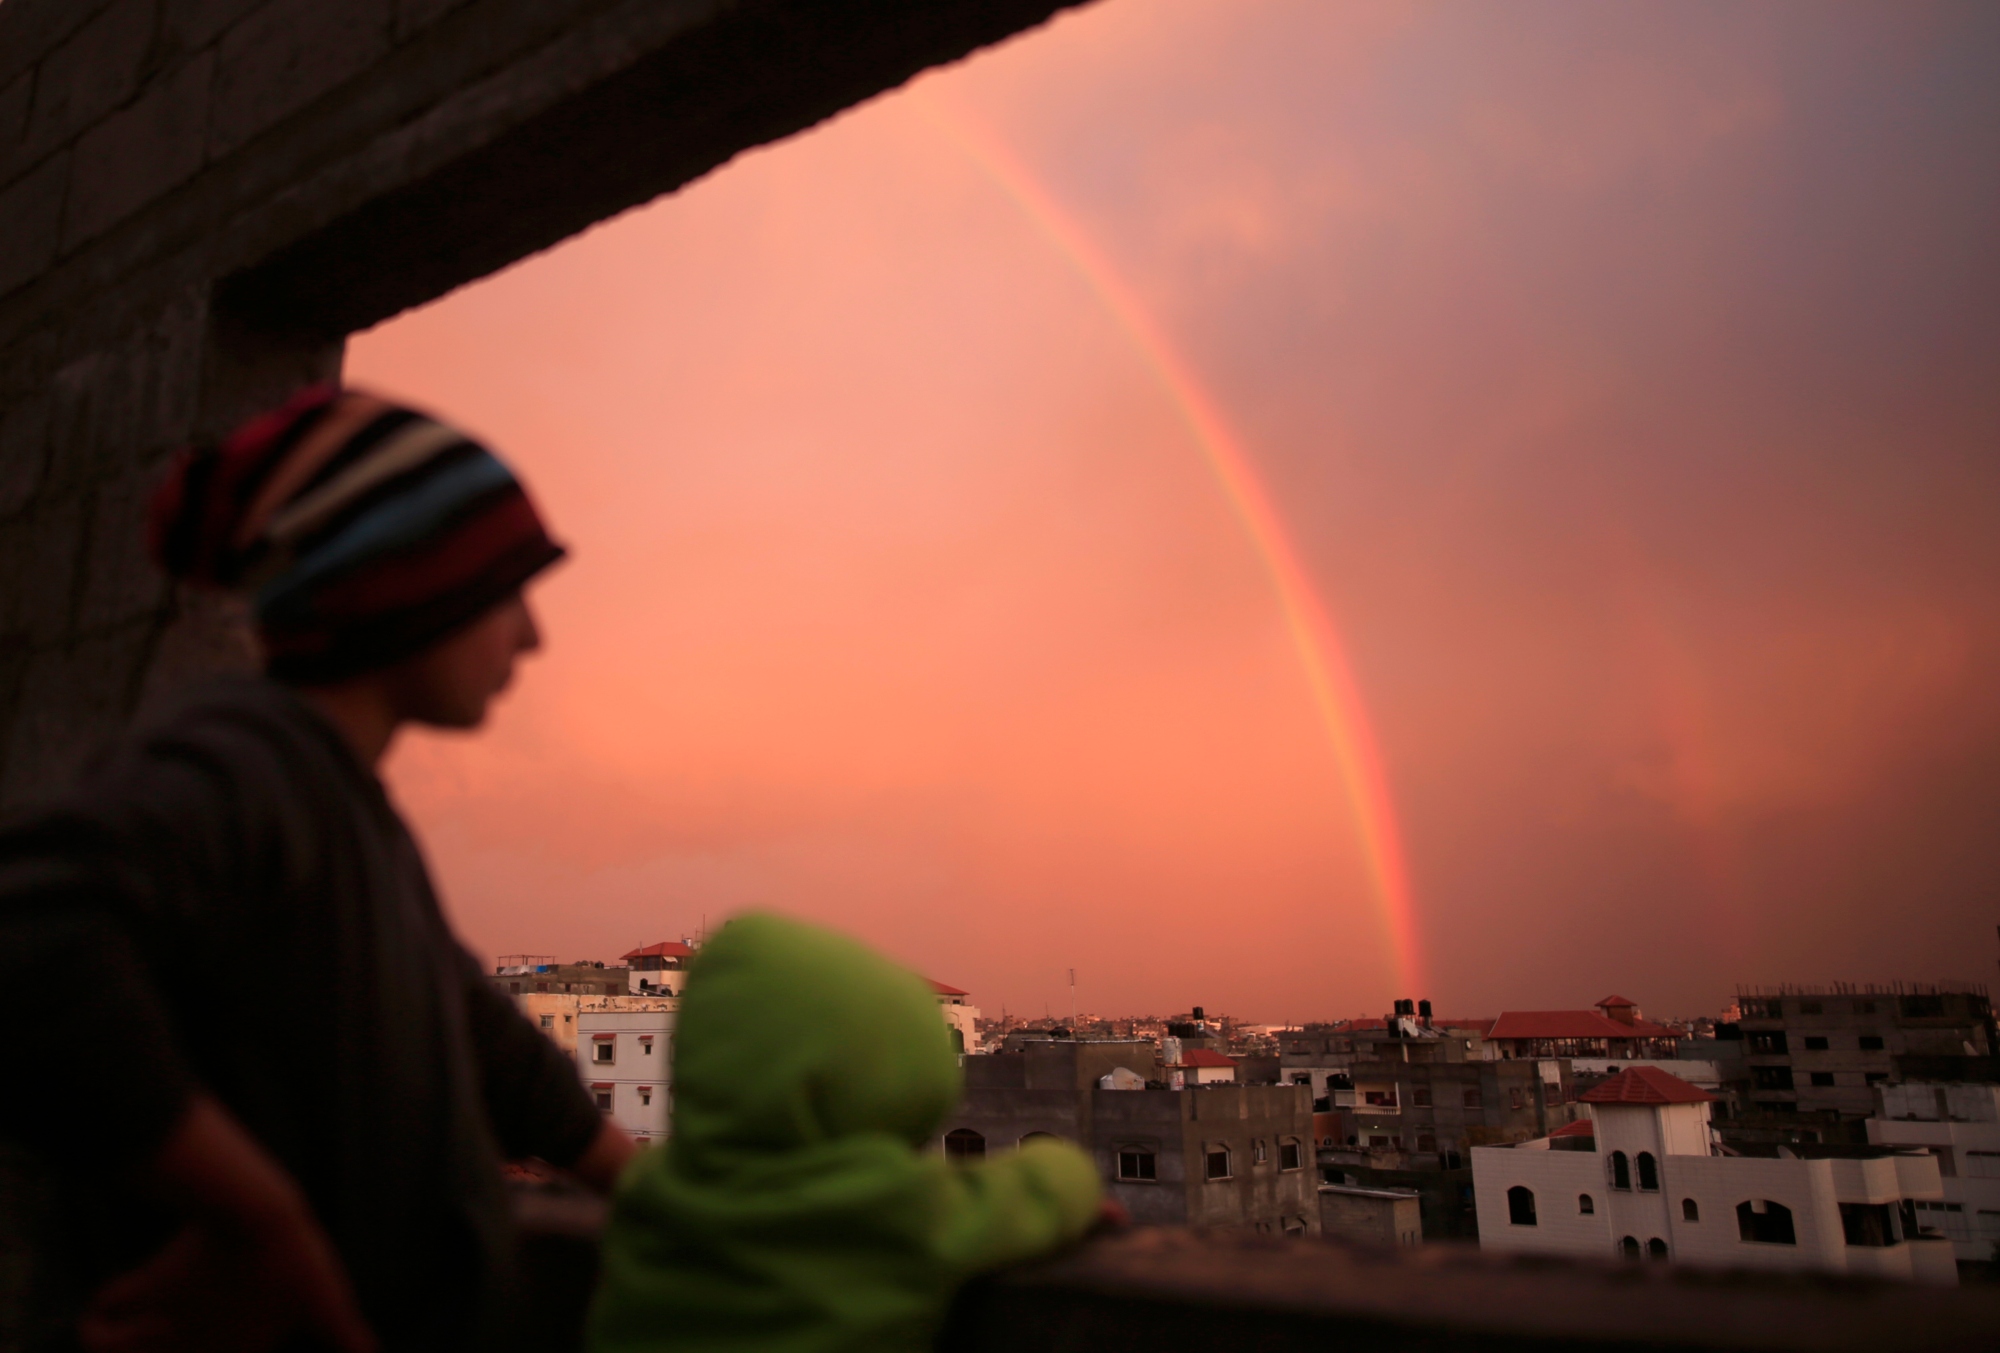 Caption: Palestinian children look at a rainbow appearing over Gaza City on 15 February 2017 (AFP)